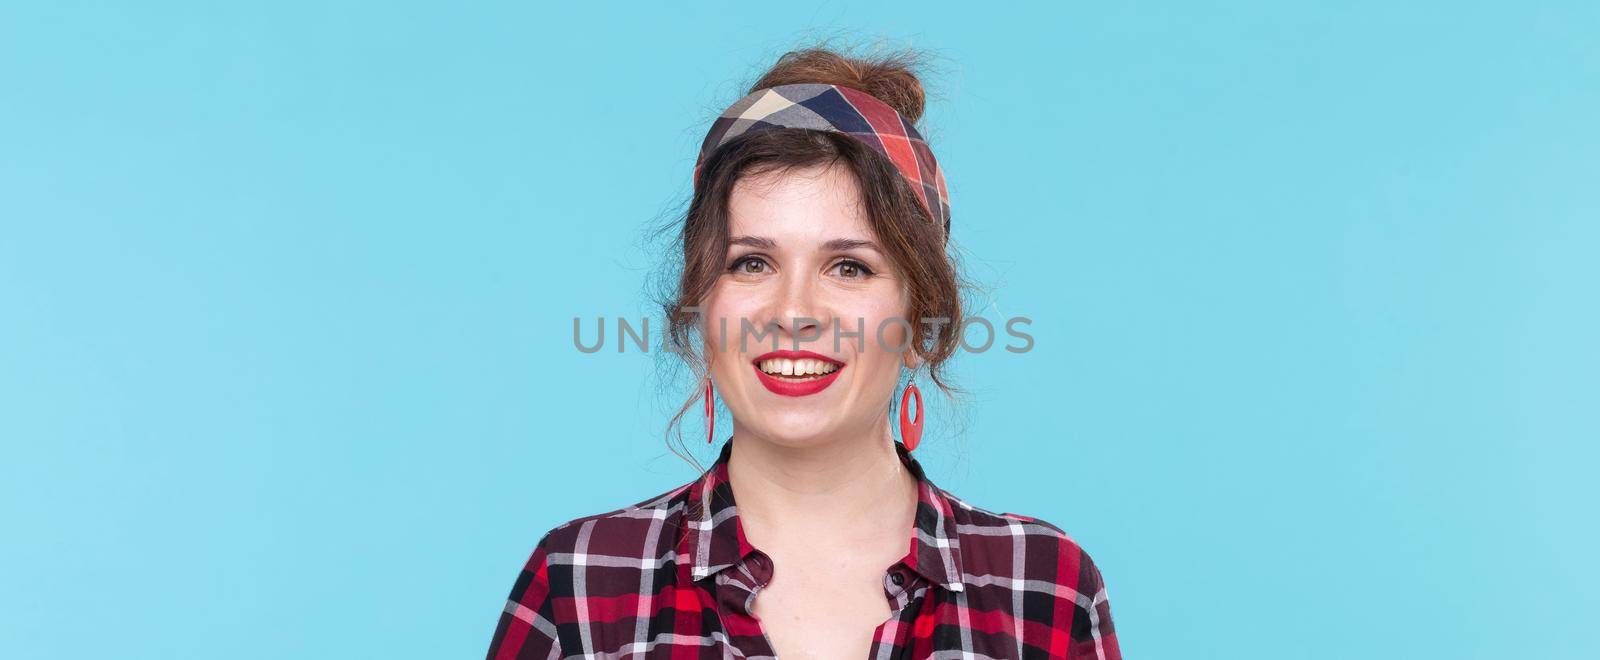 retro, vintage, people concept - woman in retro style smilling over the blue background.